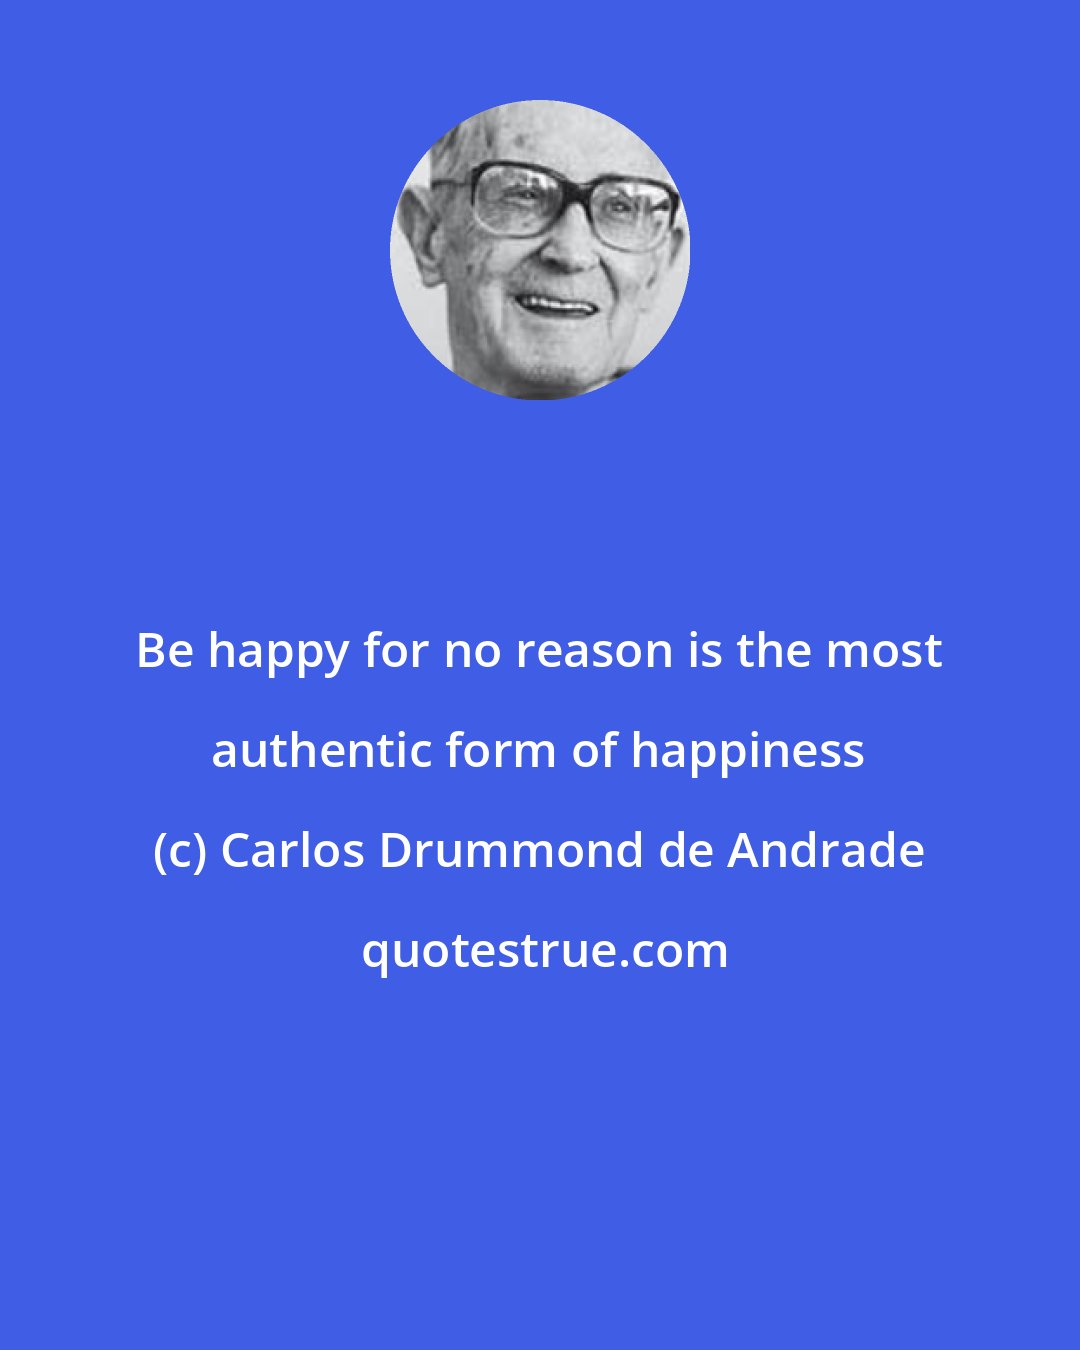 Carlos Drummond de Andrade: Be happy for no reason is the most authentic form of happiness